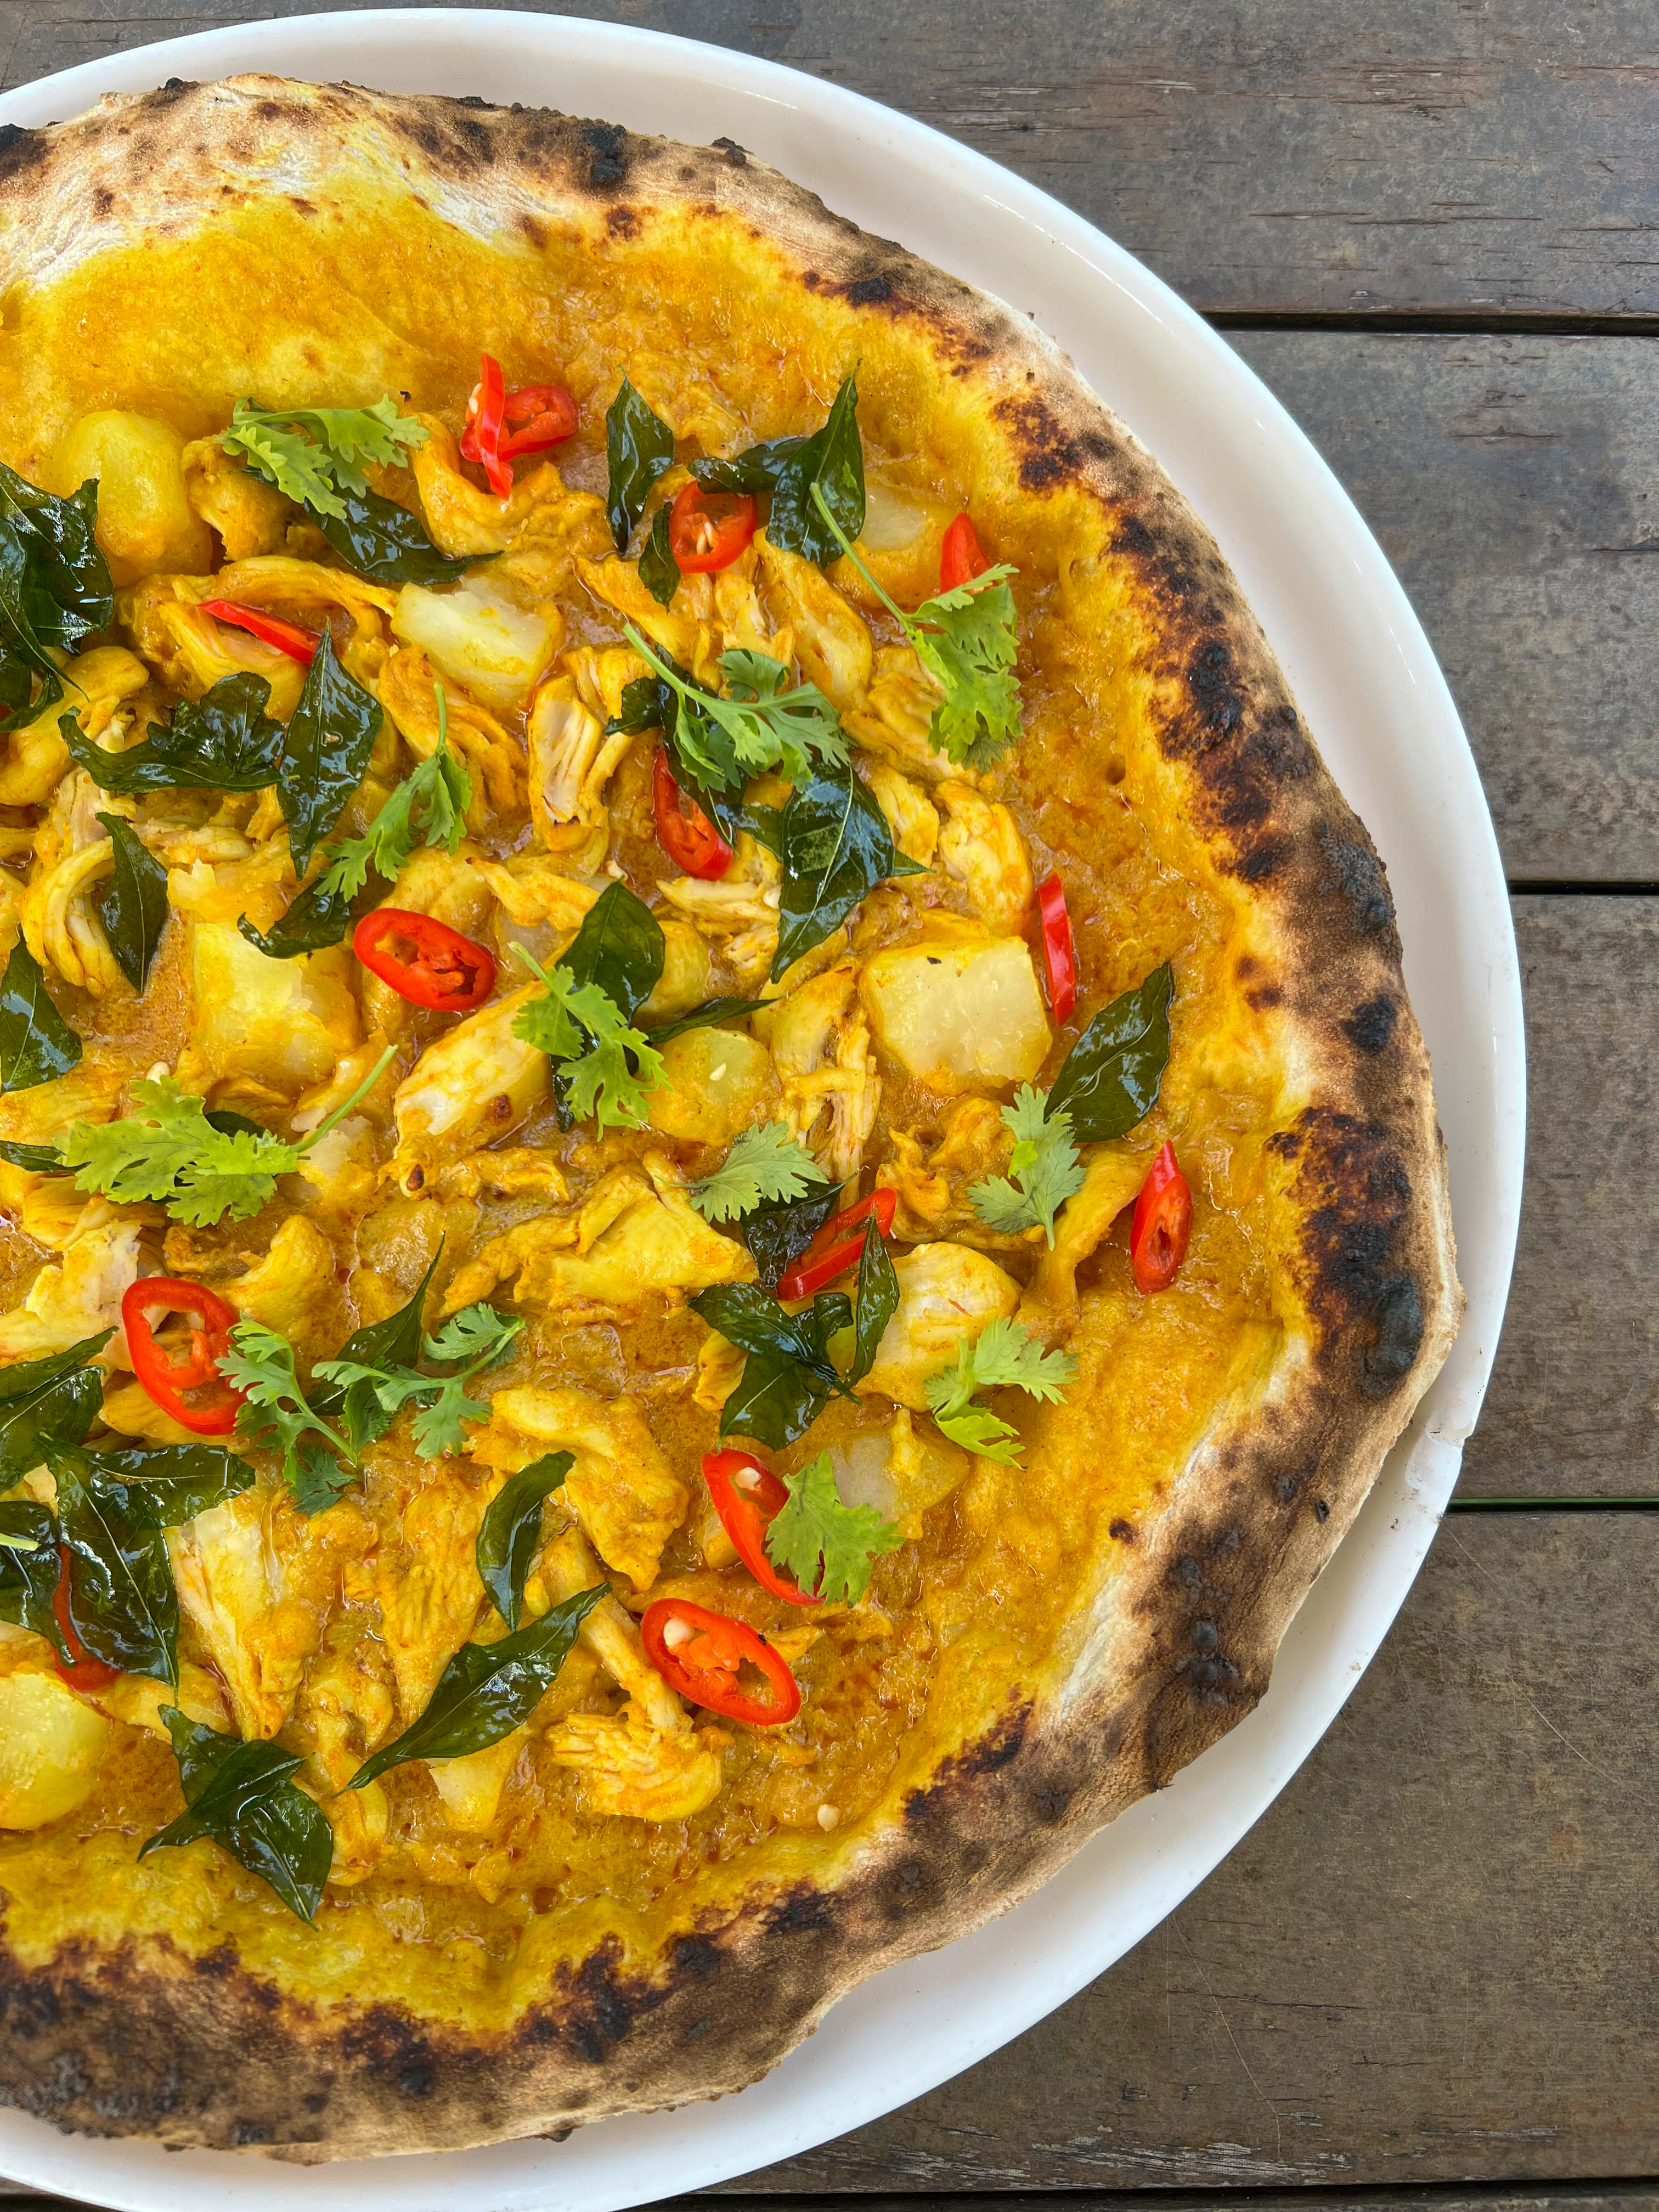 August's Special - Curry Chicken Pizza